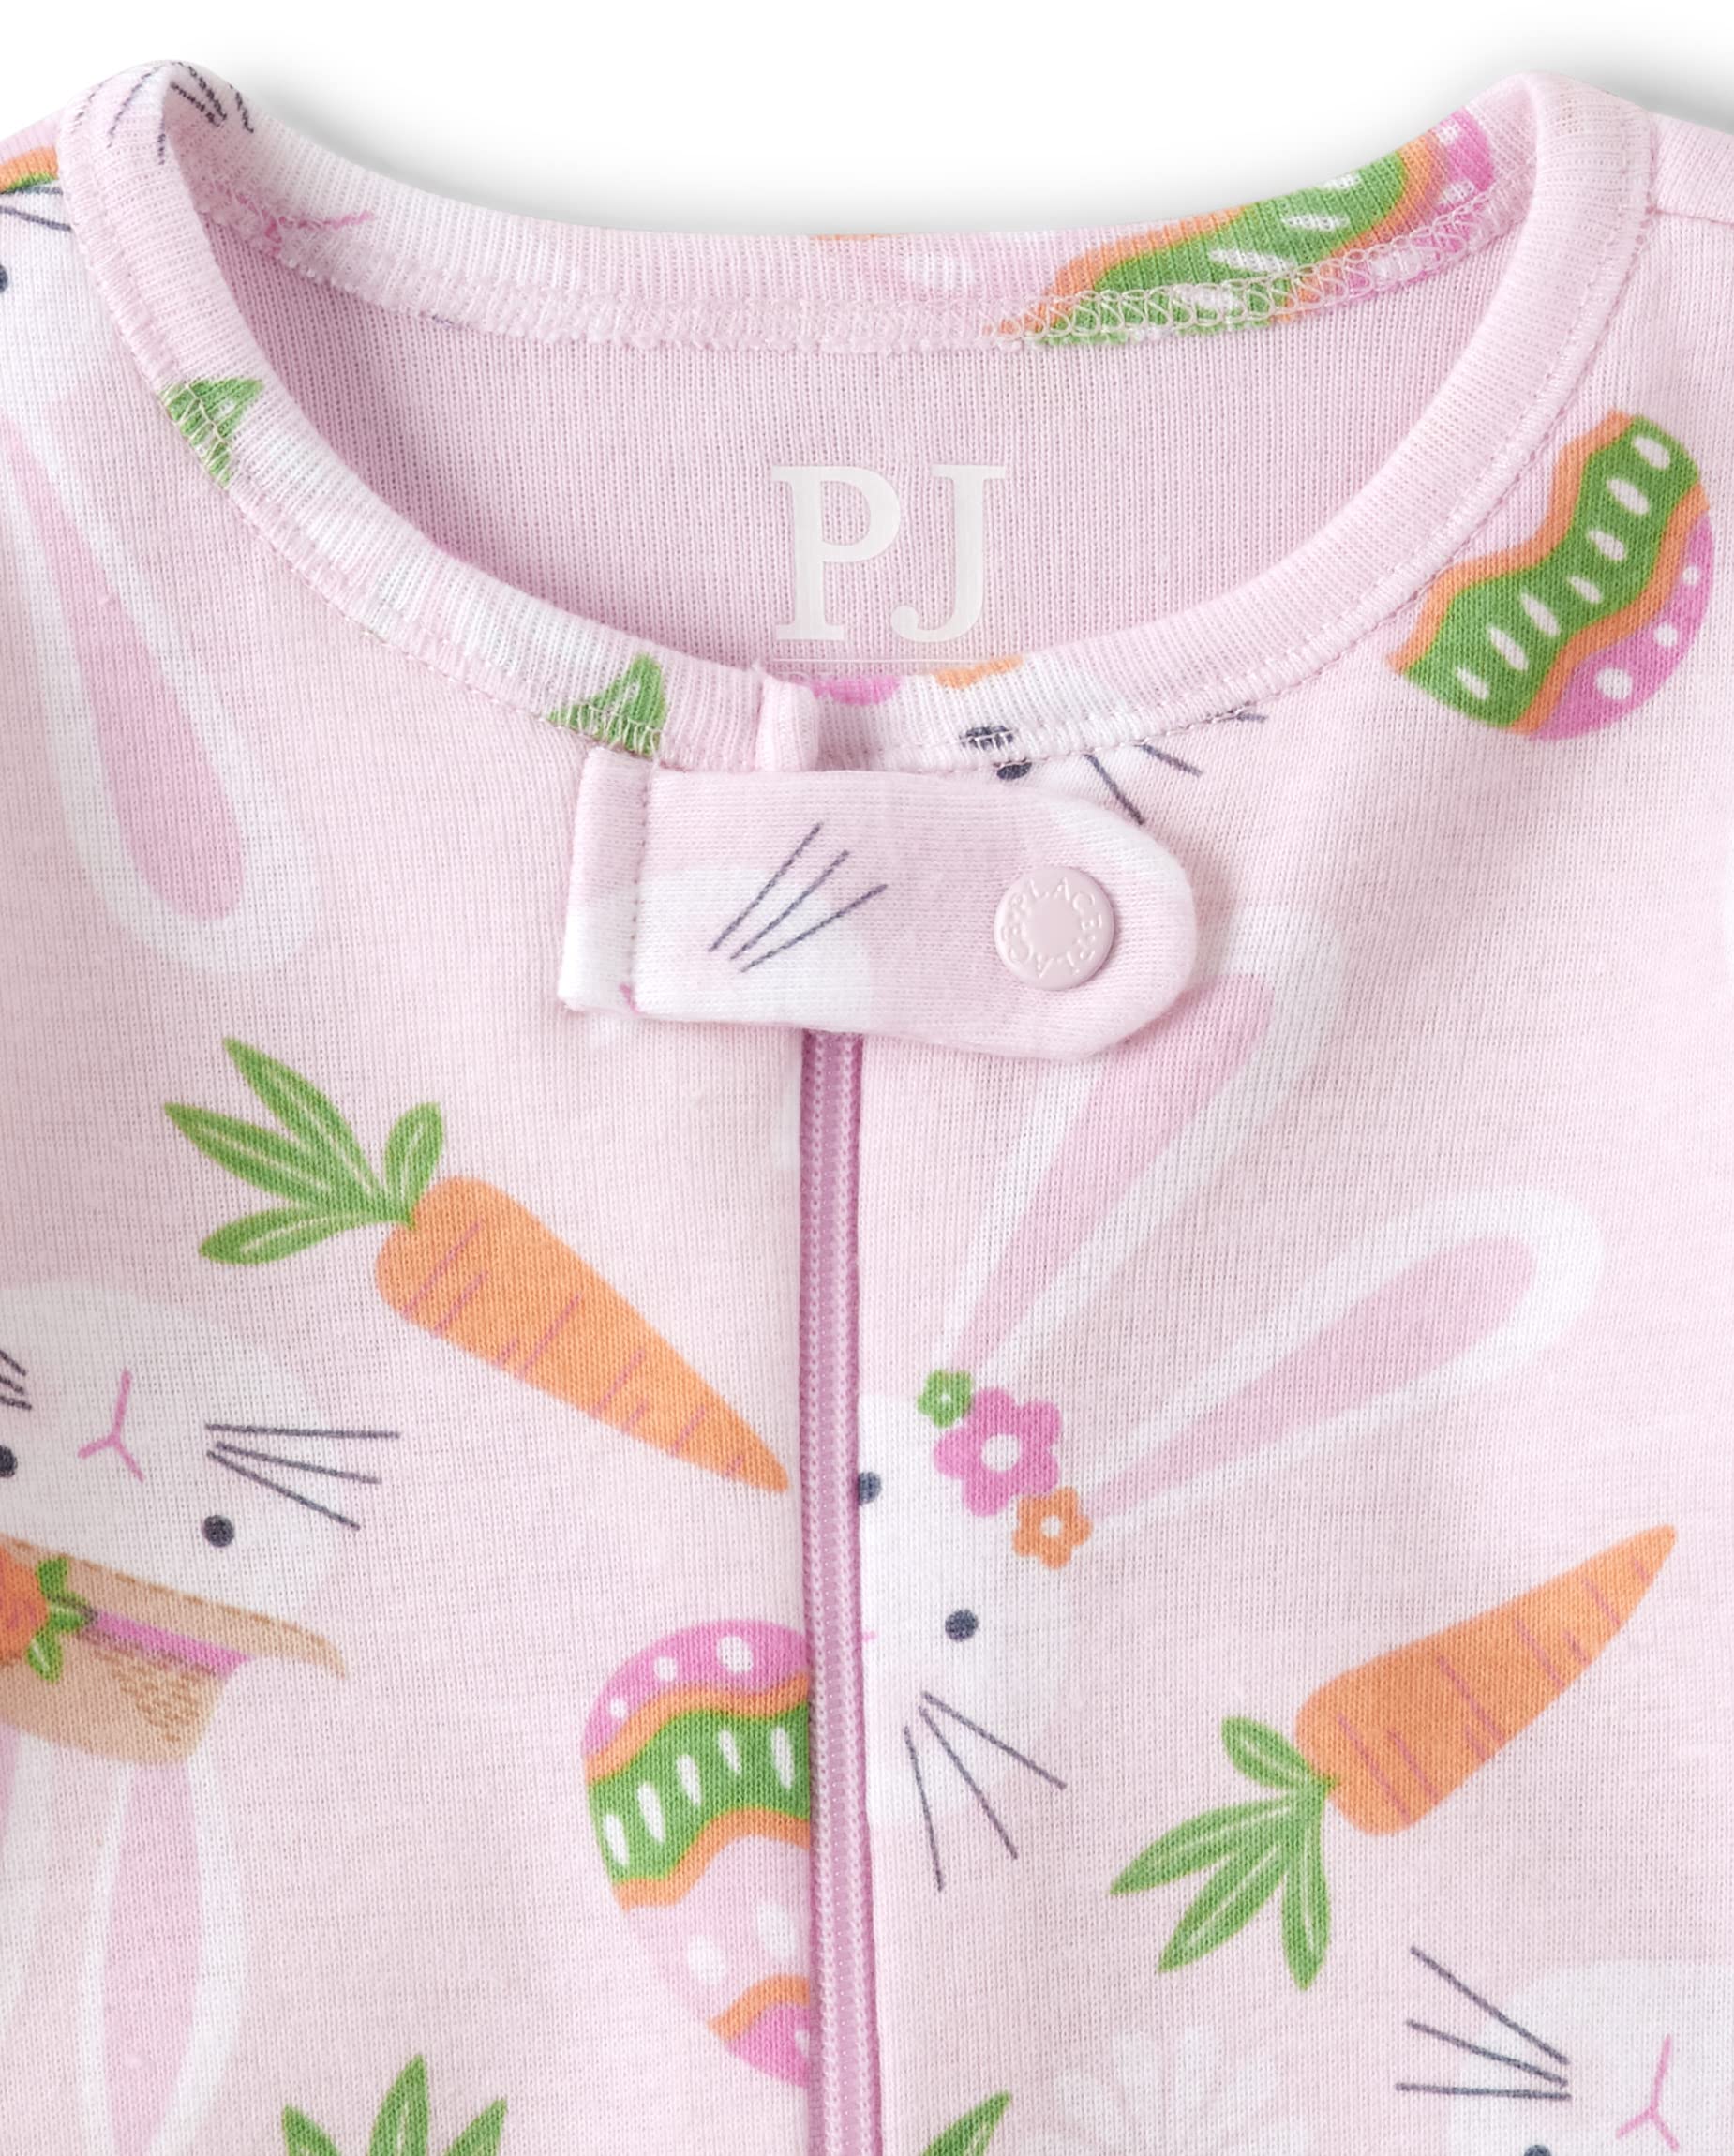 The Children's Place Easter Family Matching Snug Fit Cotton Pajamas